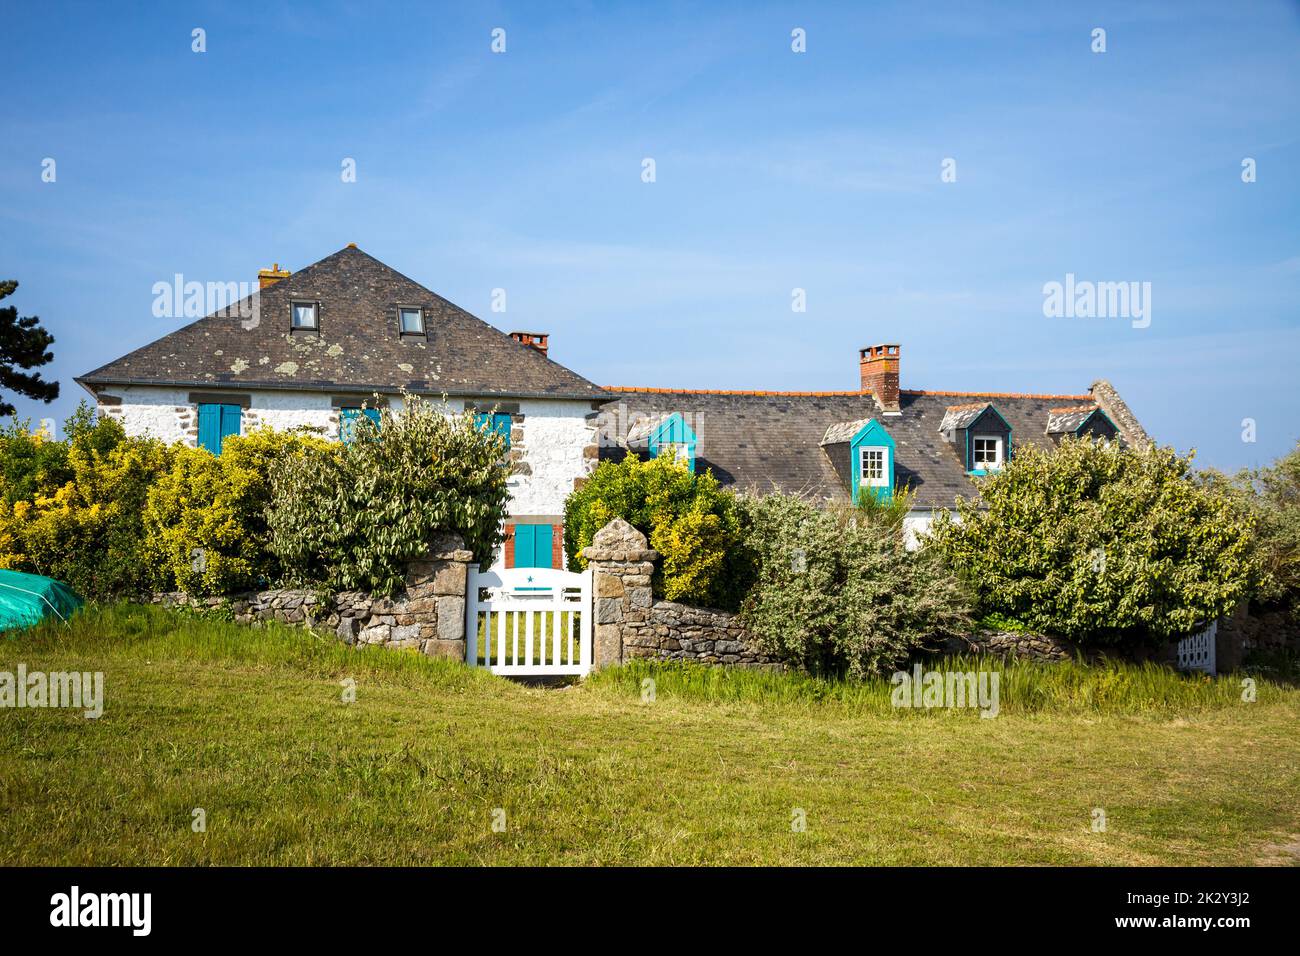 Old house on Chausey island, Brittany, France Stock Photo